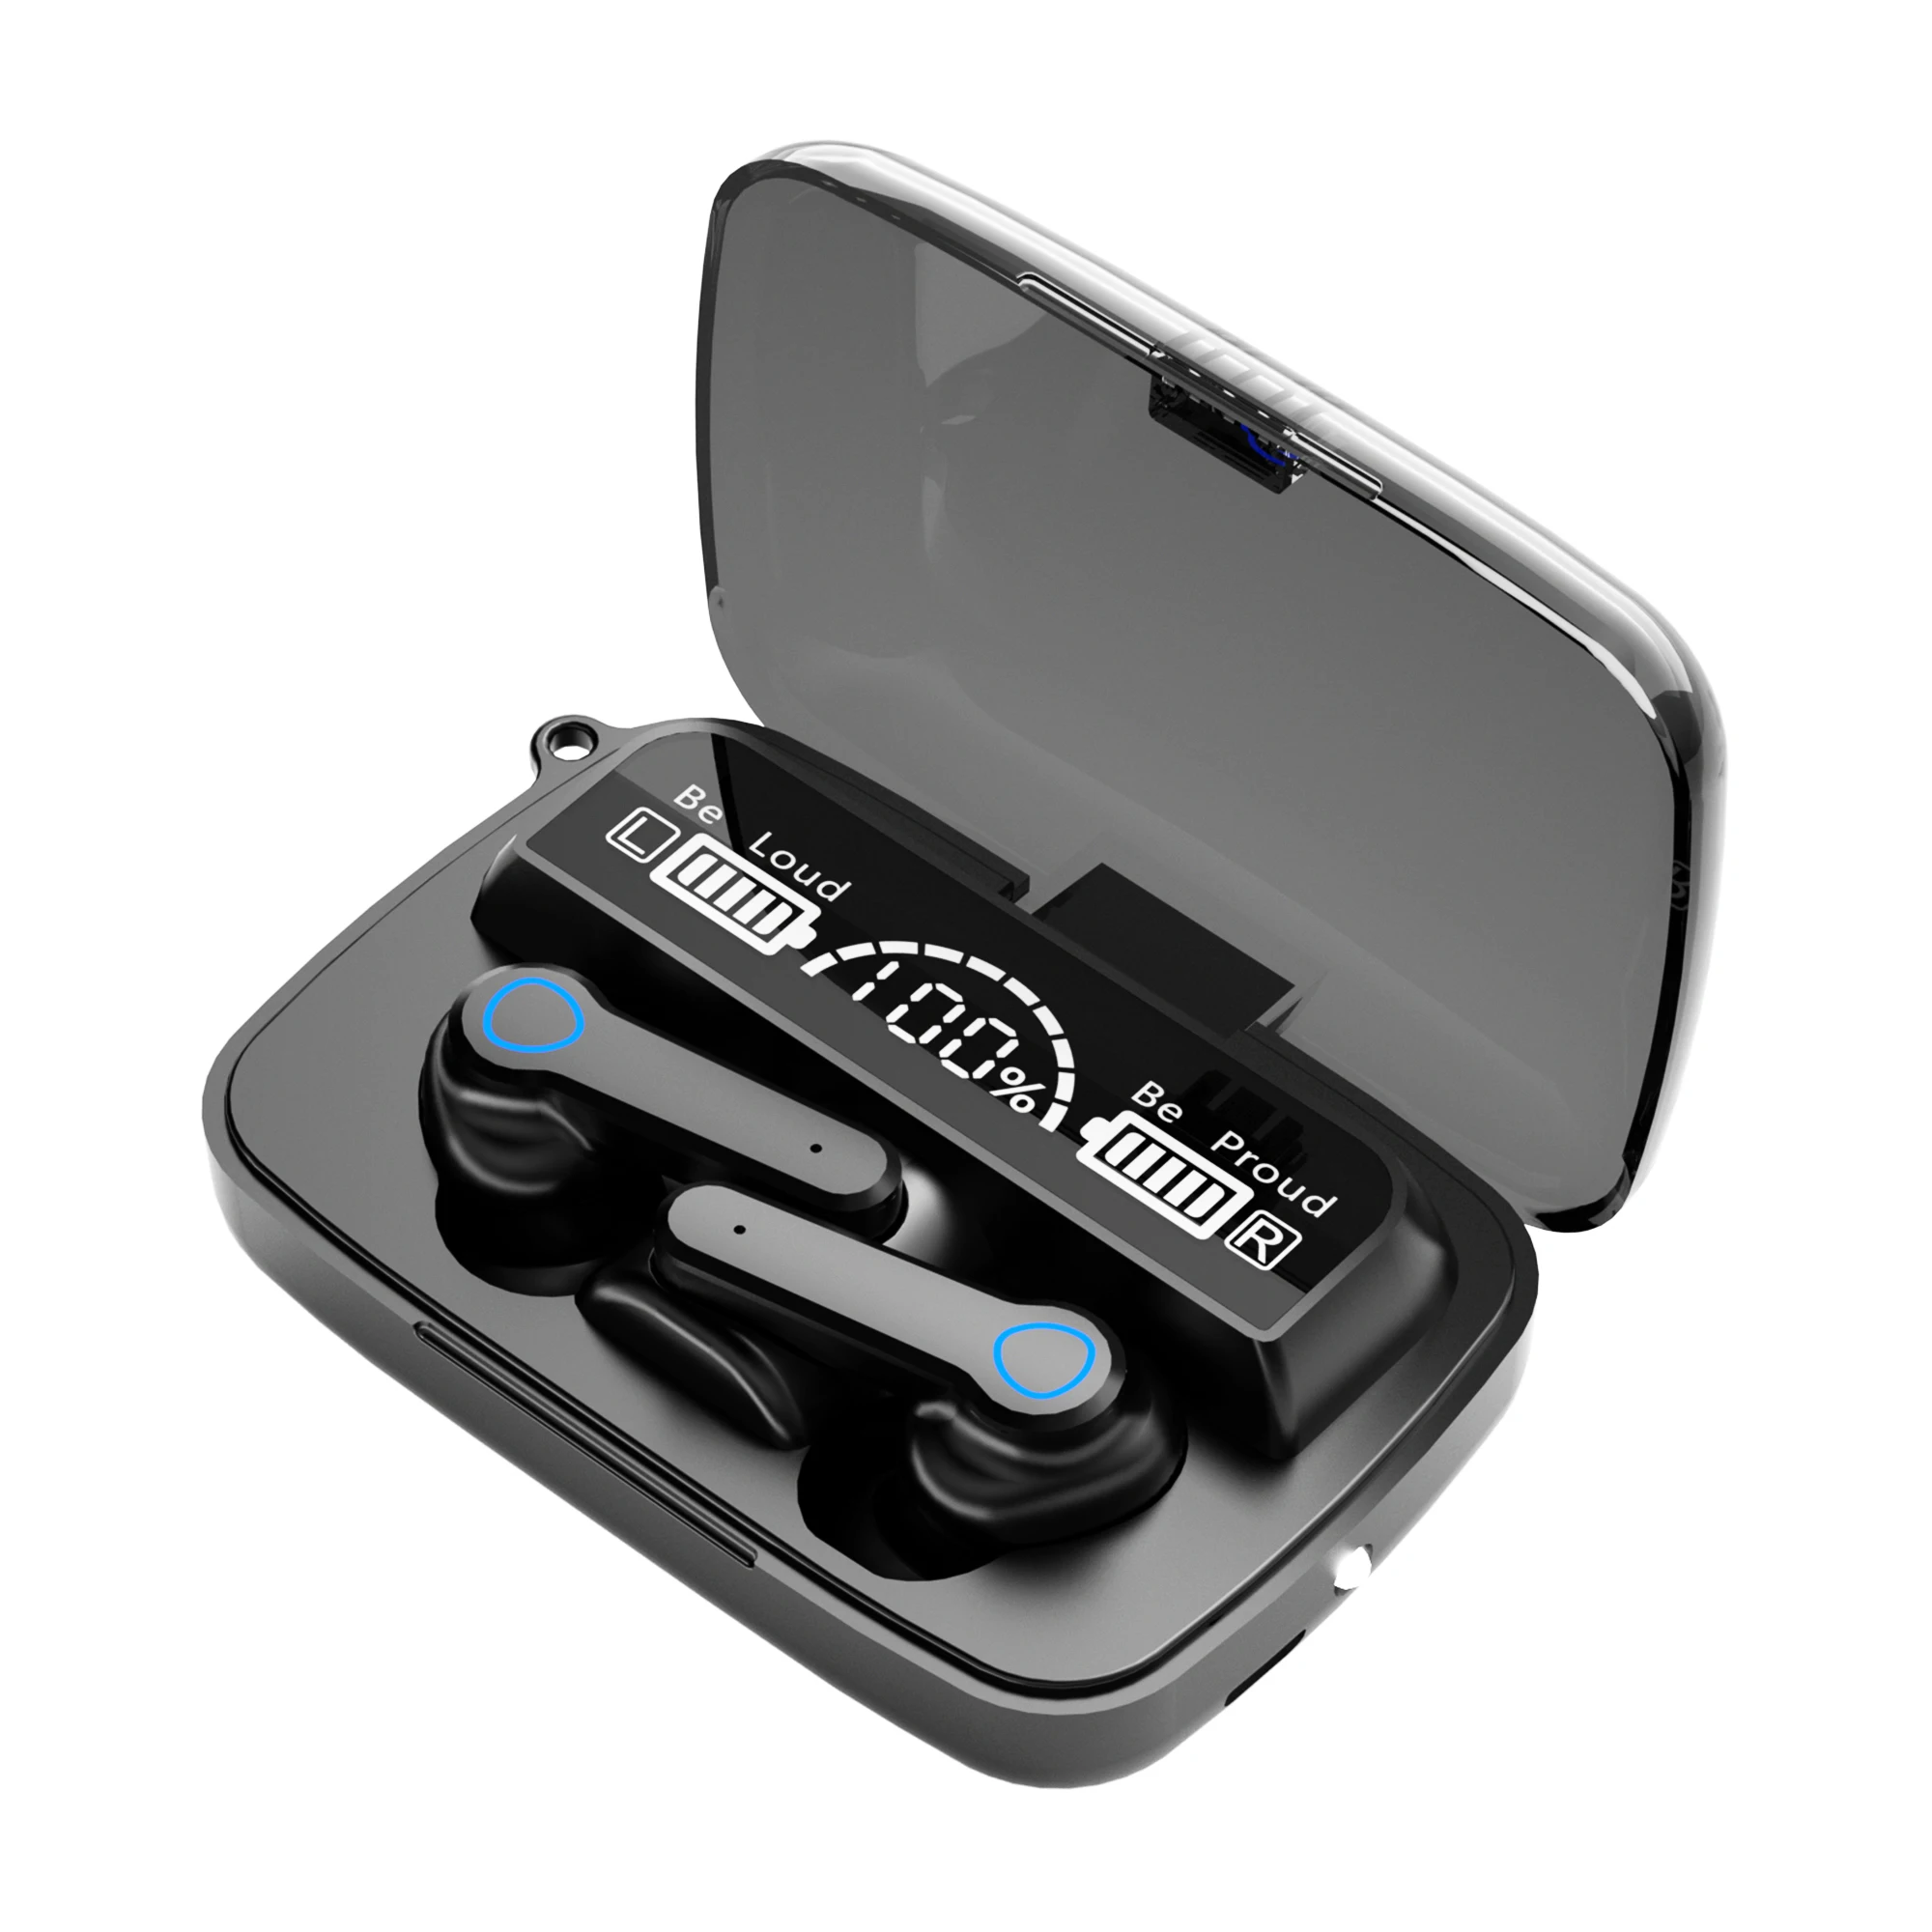 

auriculares tws inalambricos bt, m19, 2021 V5.1 earphones active noise cancelling wireless earbuds audifonos